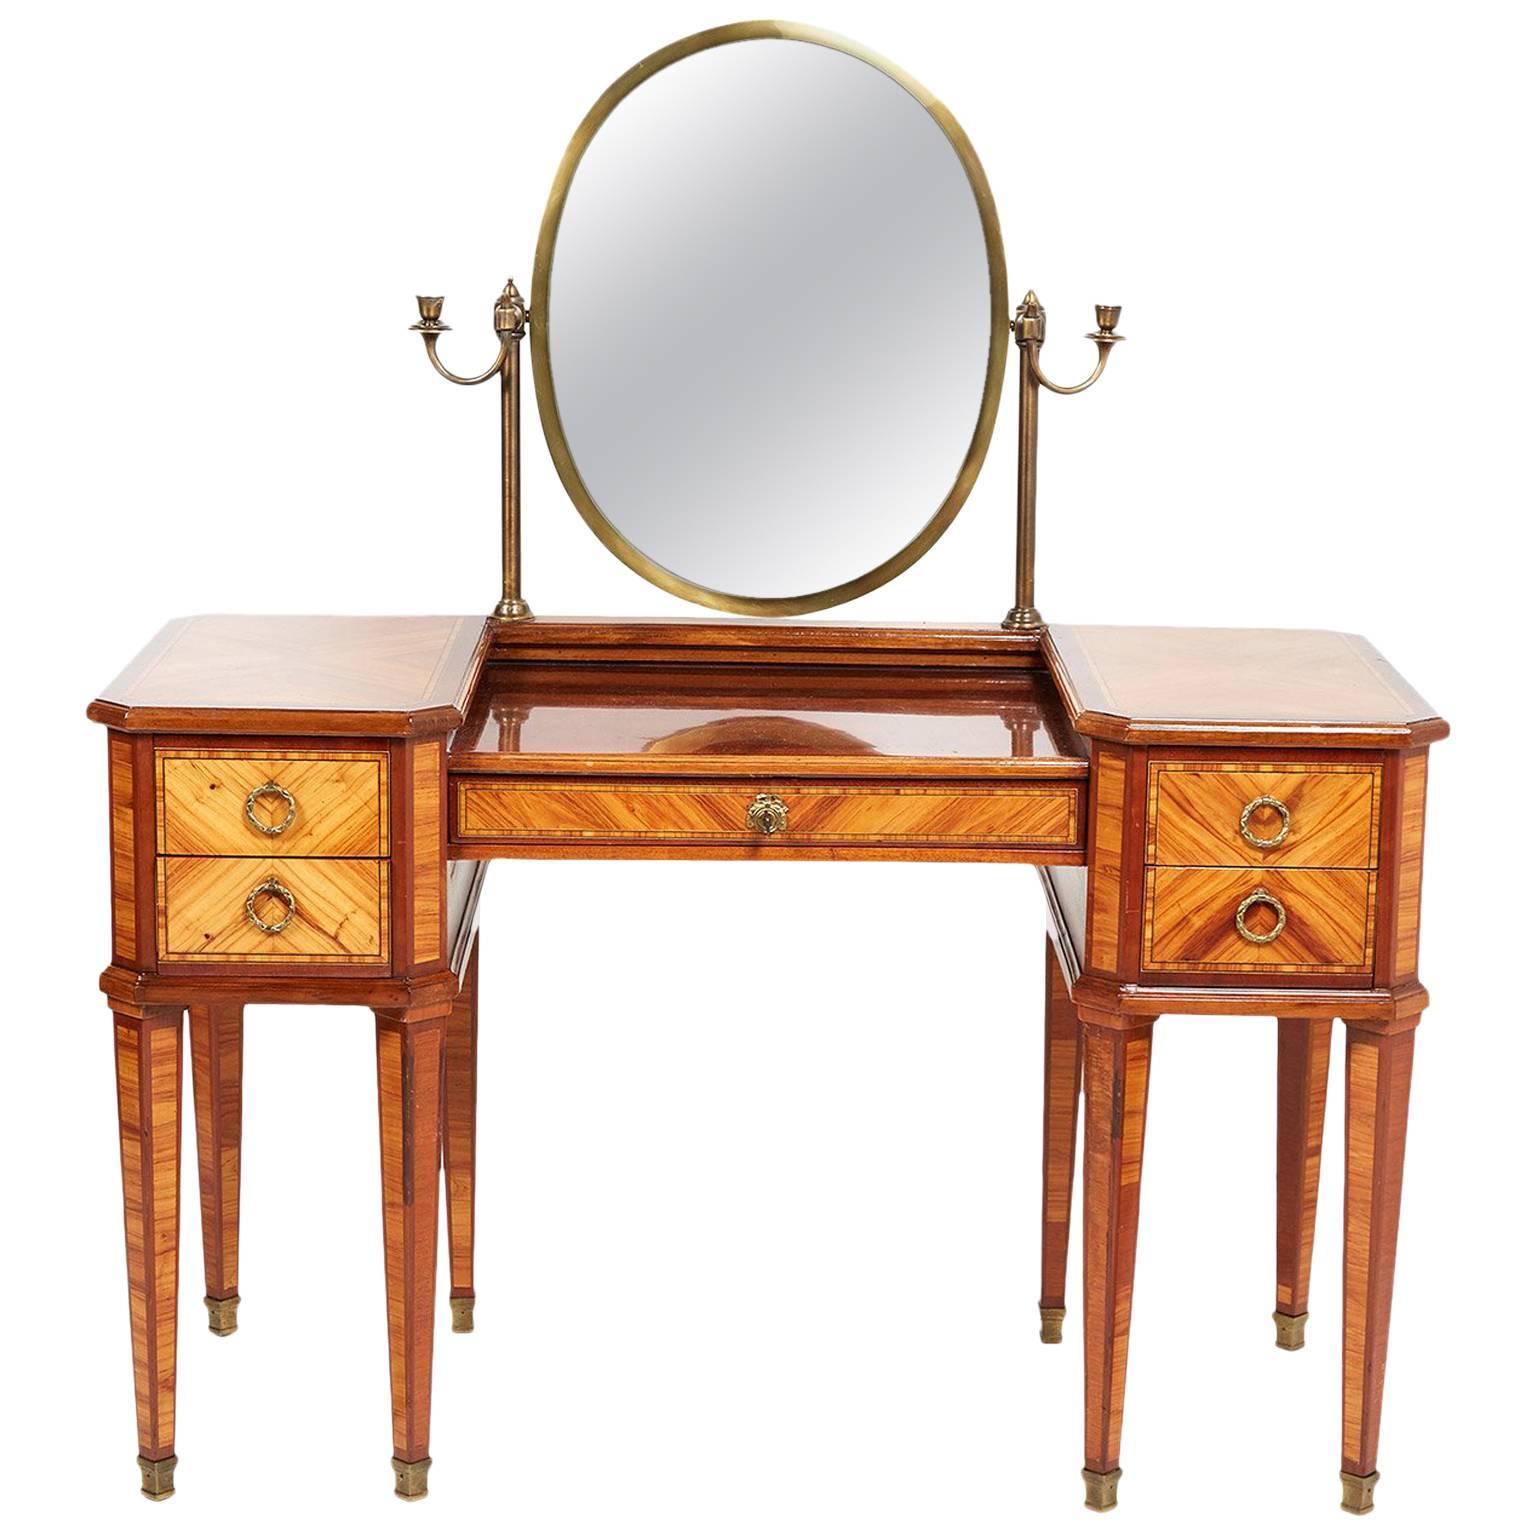 Antique French Mid-20th Century Highly Inlaid Mahogany and Kingwood Vanity